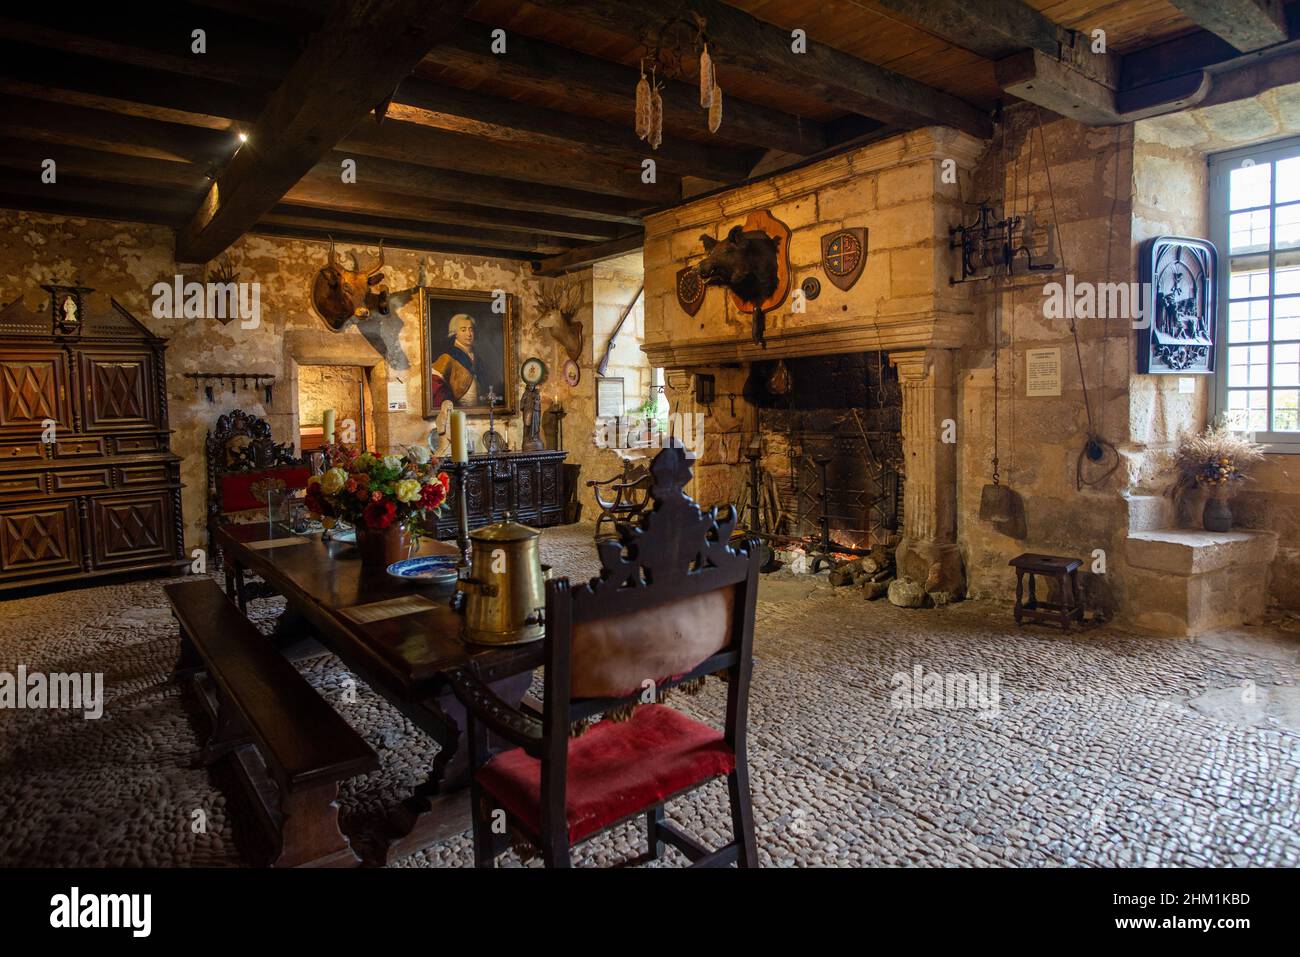 Tursac, France - November 5, 2021: Renaissance interior of the Maison forte de Reignac de  with antic furniture, fireplace, but with no people Stock Photo